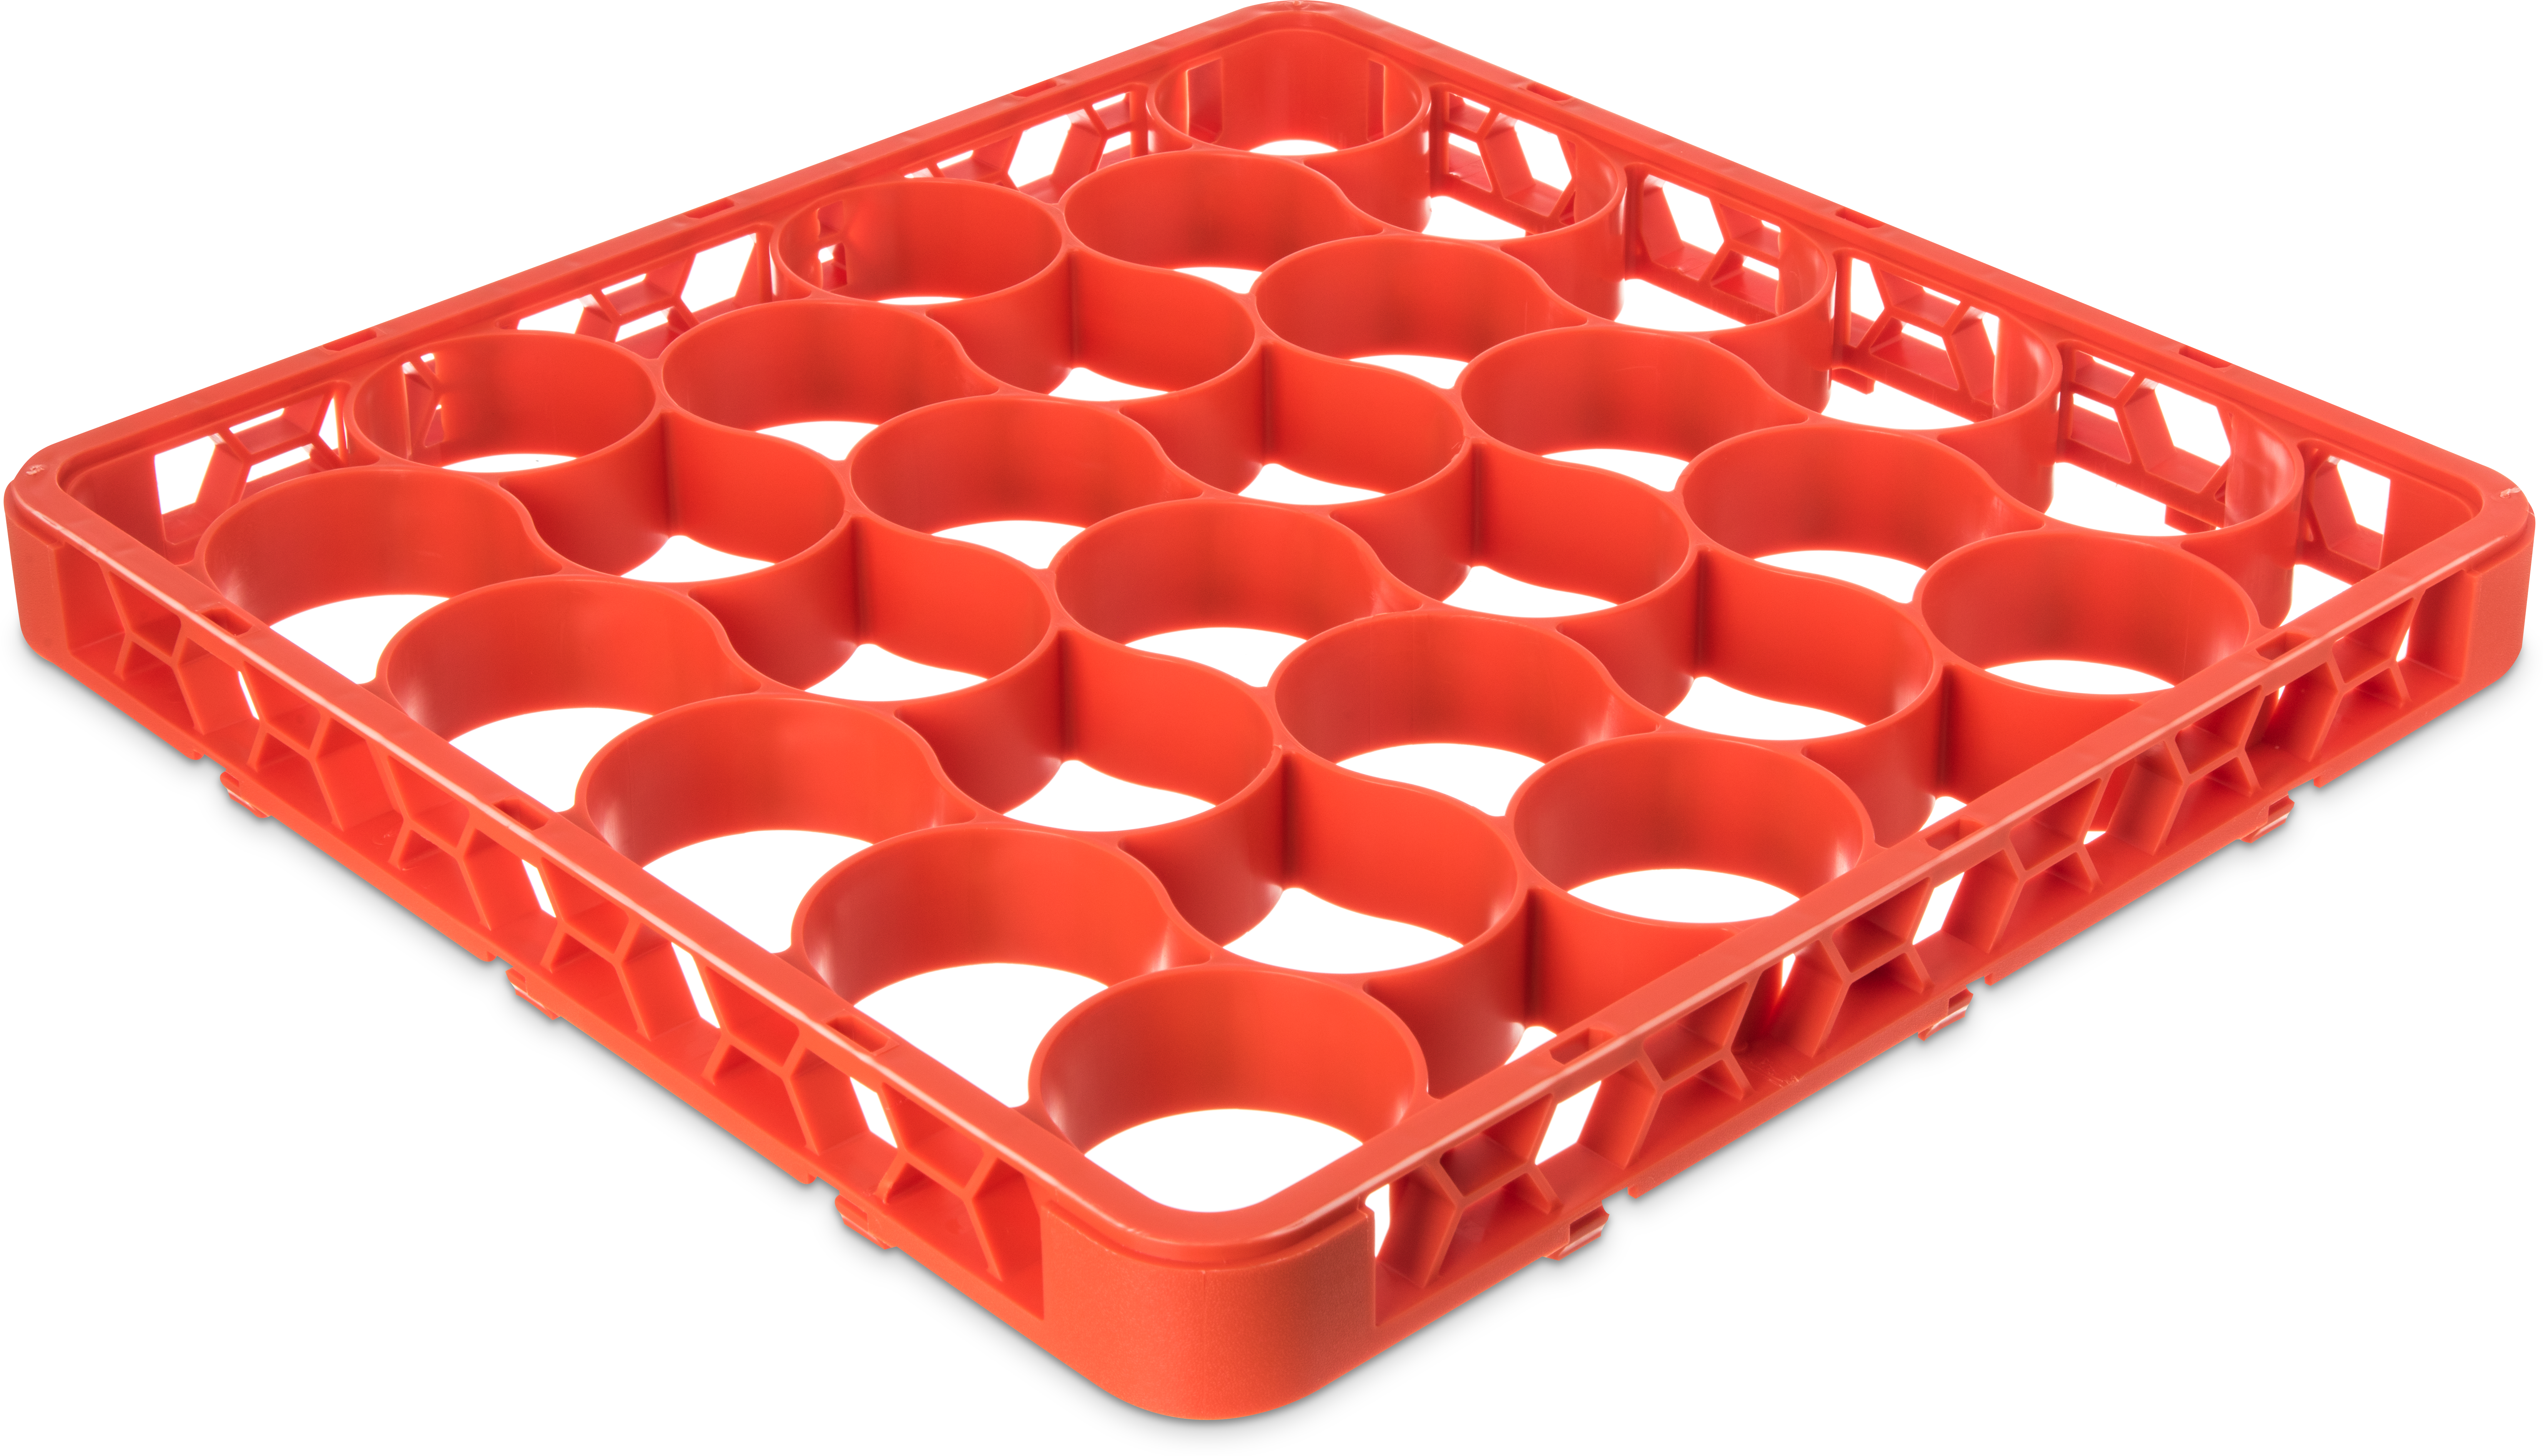 OptiClean NeWave Color-Coded Short Glass Rack Extender 30 Compartment - Orange